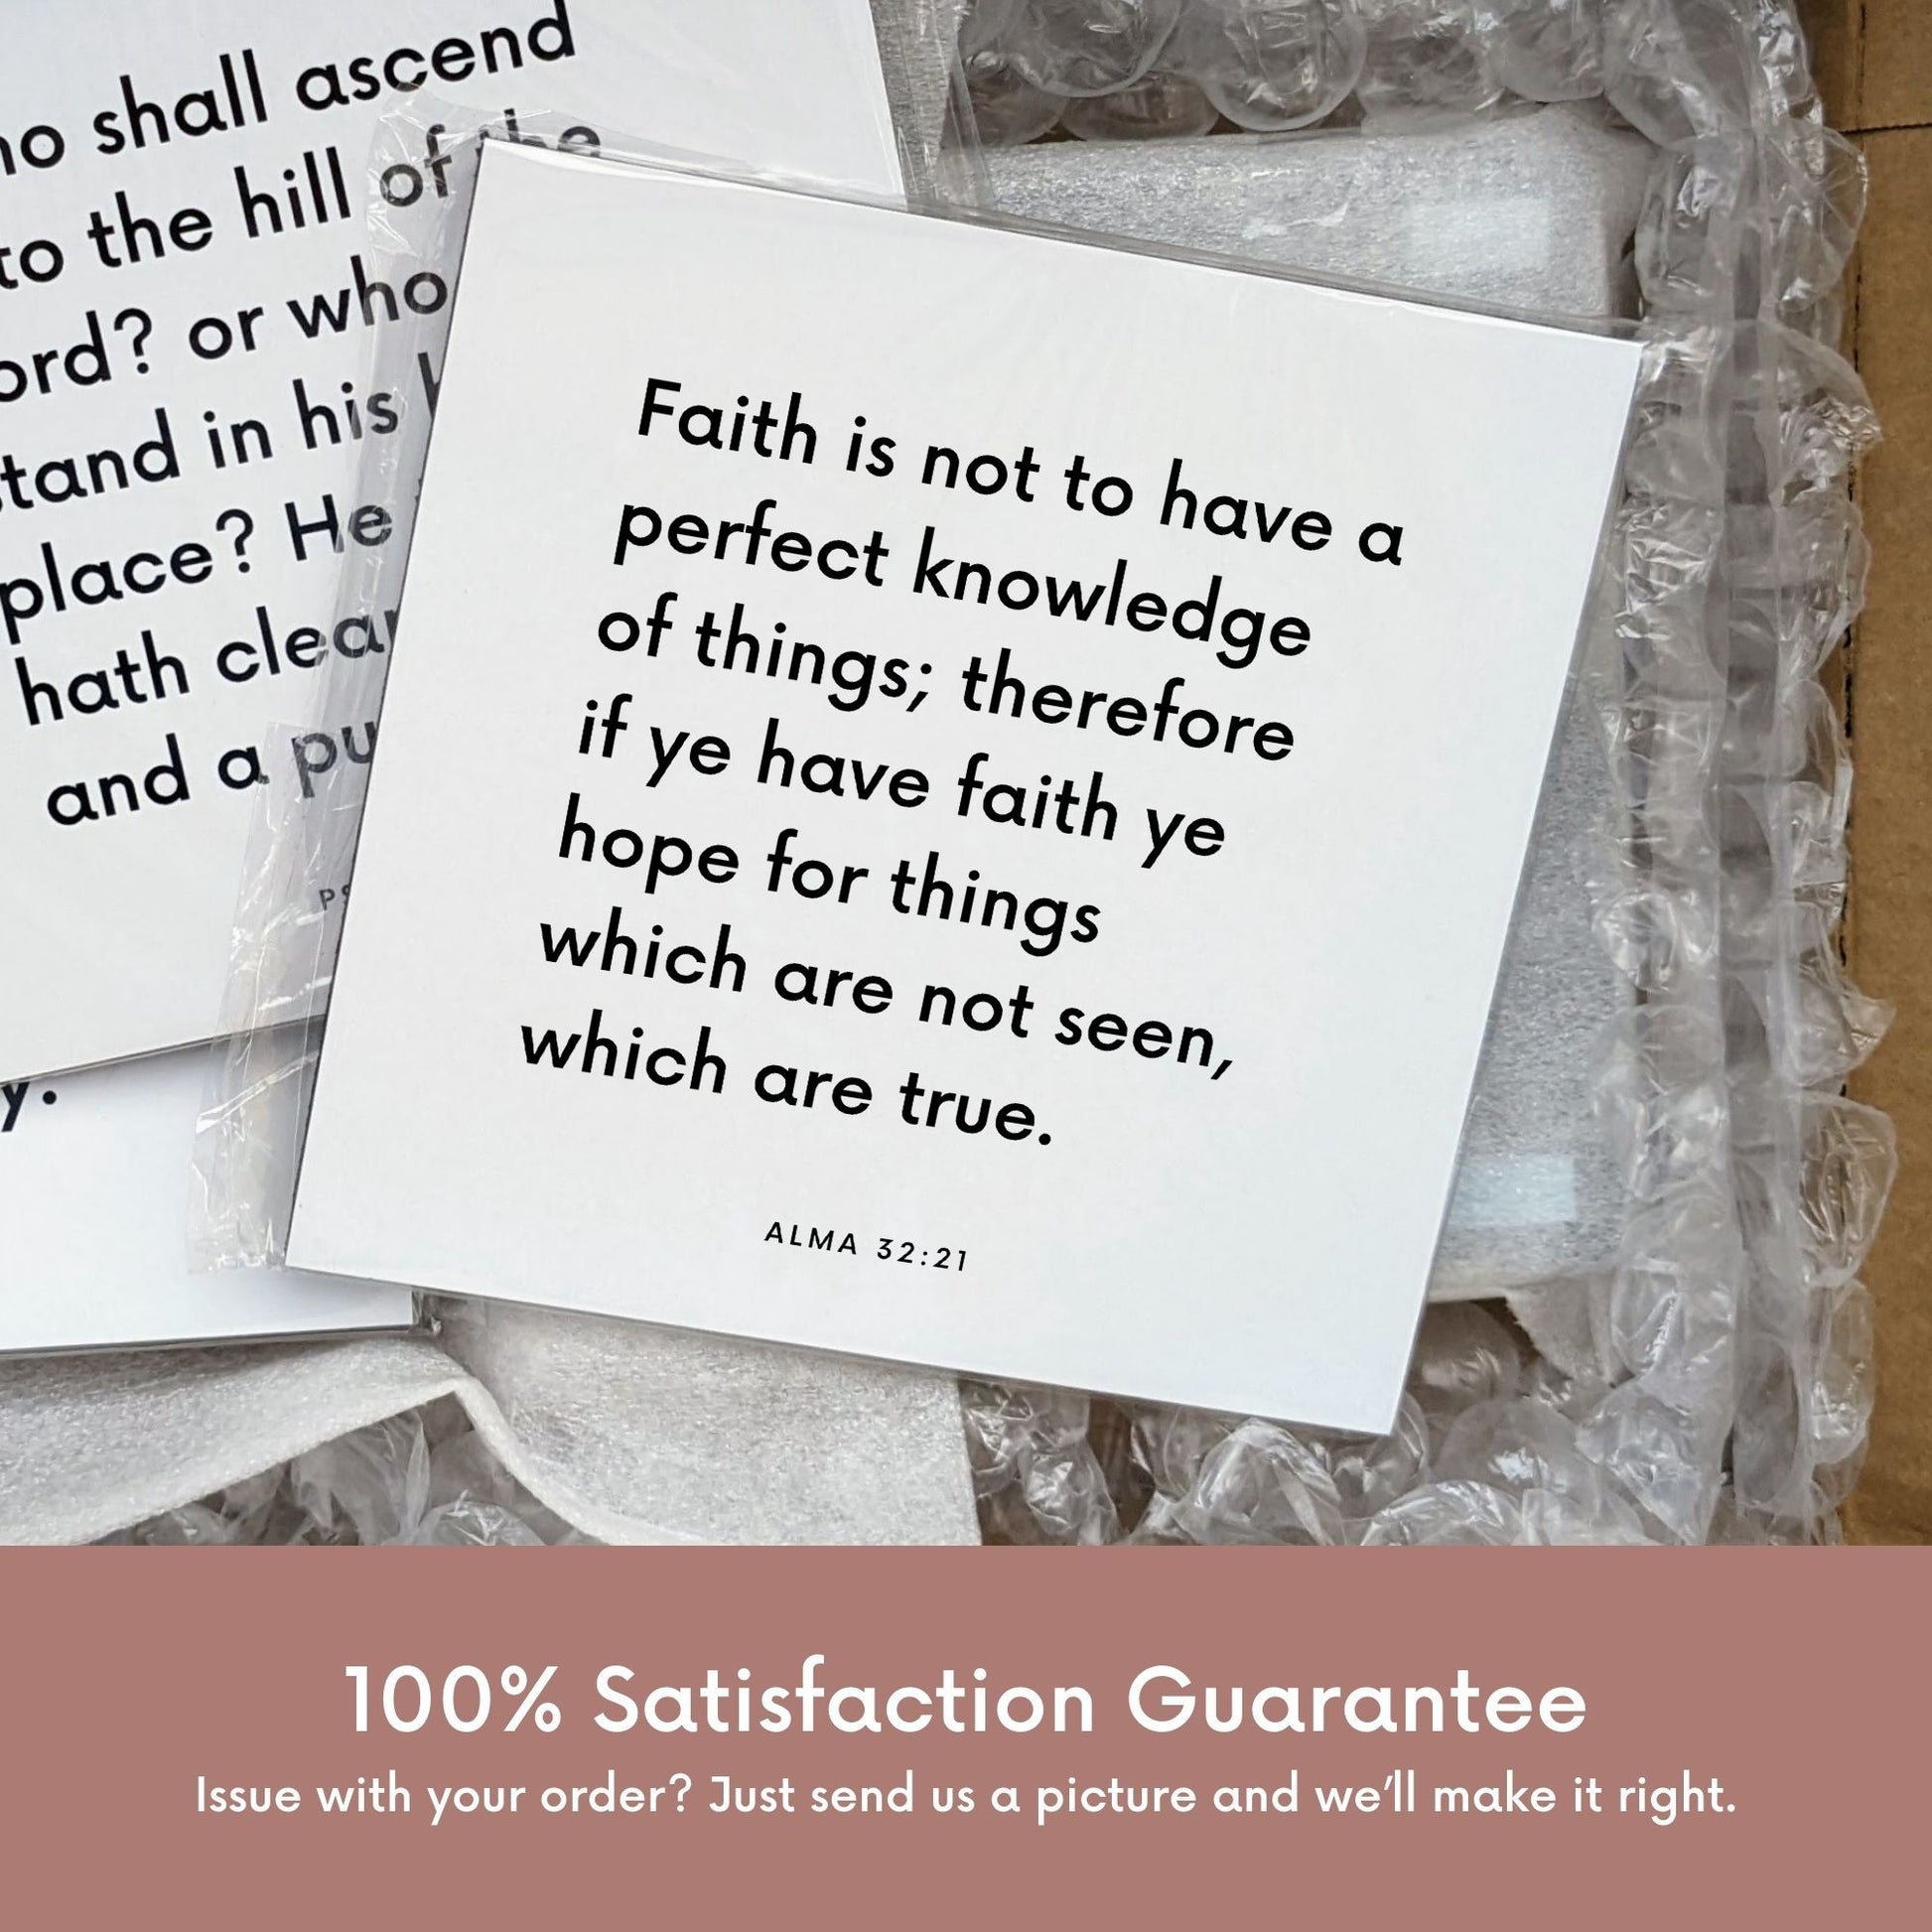 Shipping materials for scripture tile of Alma 32:21 - "Faith is not to have a perfect knowledge"